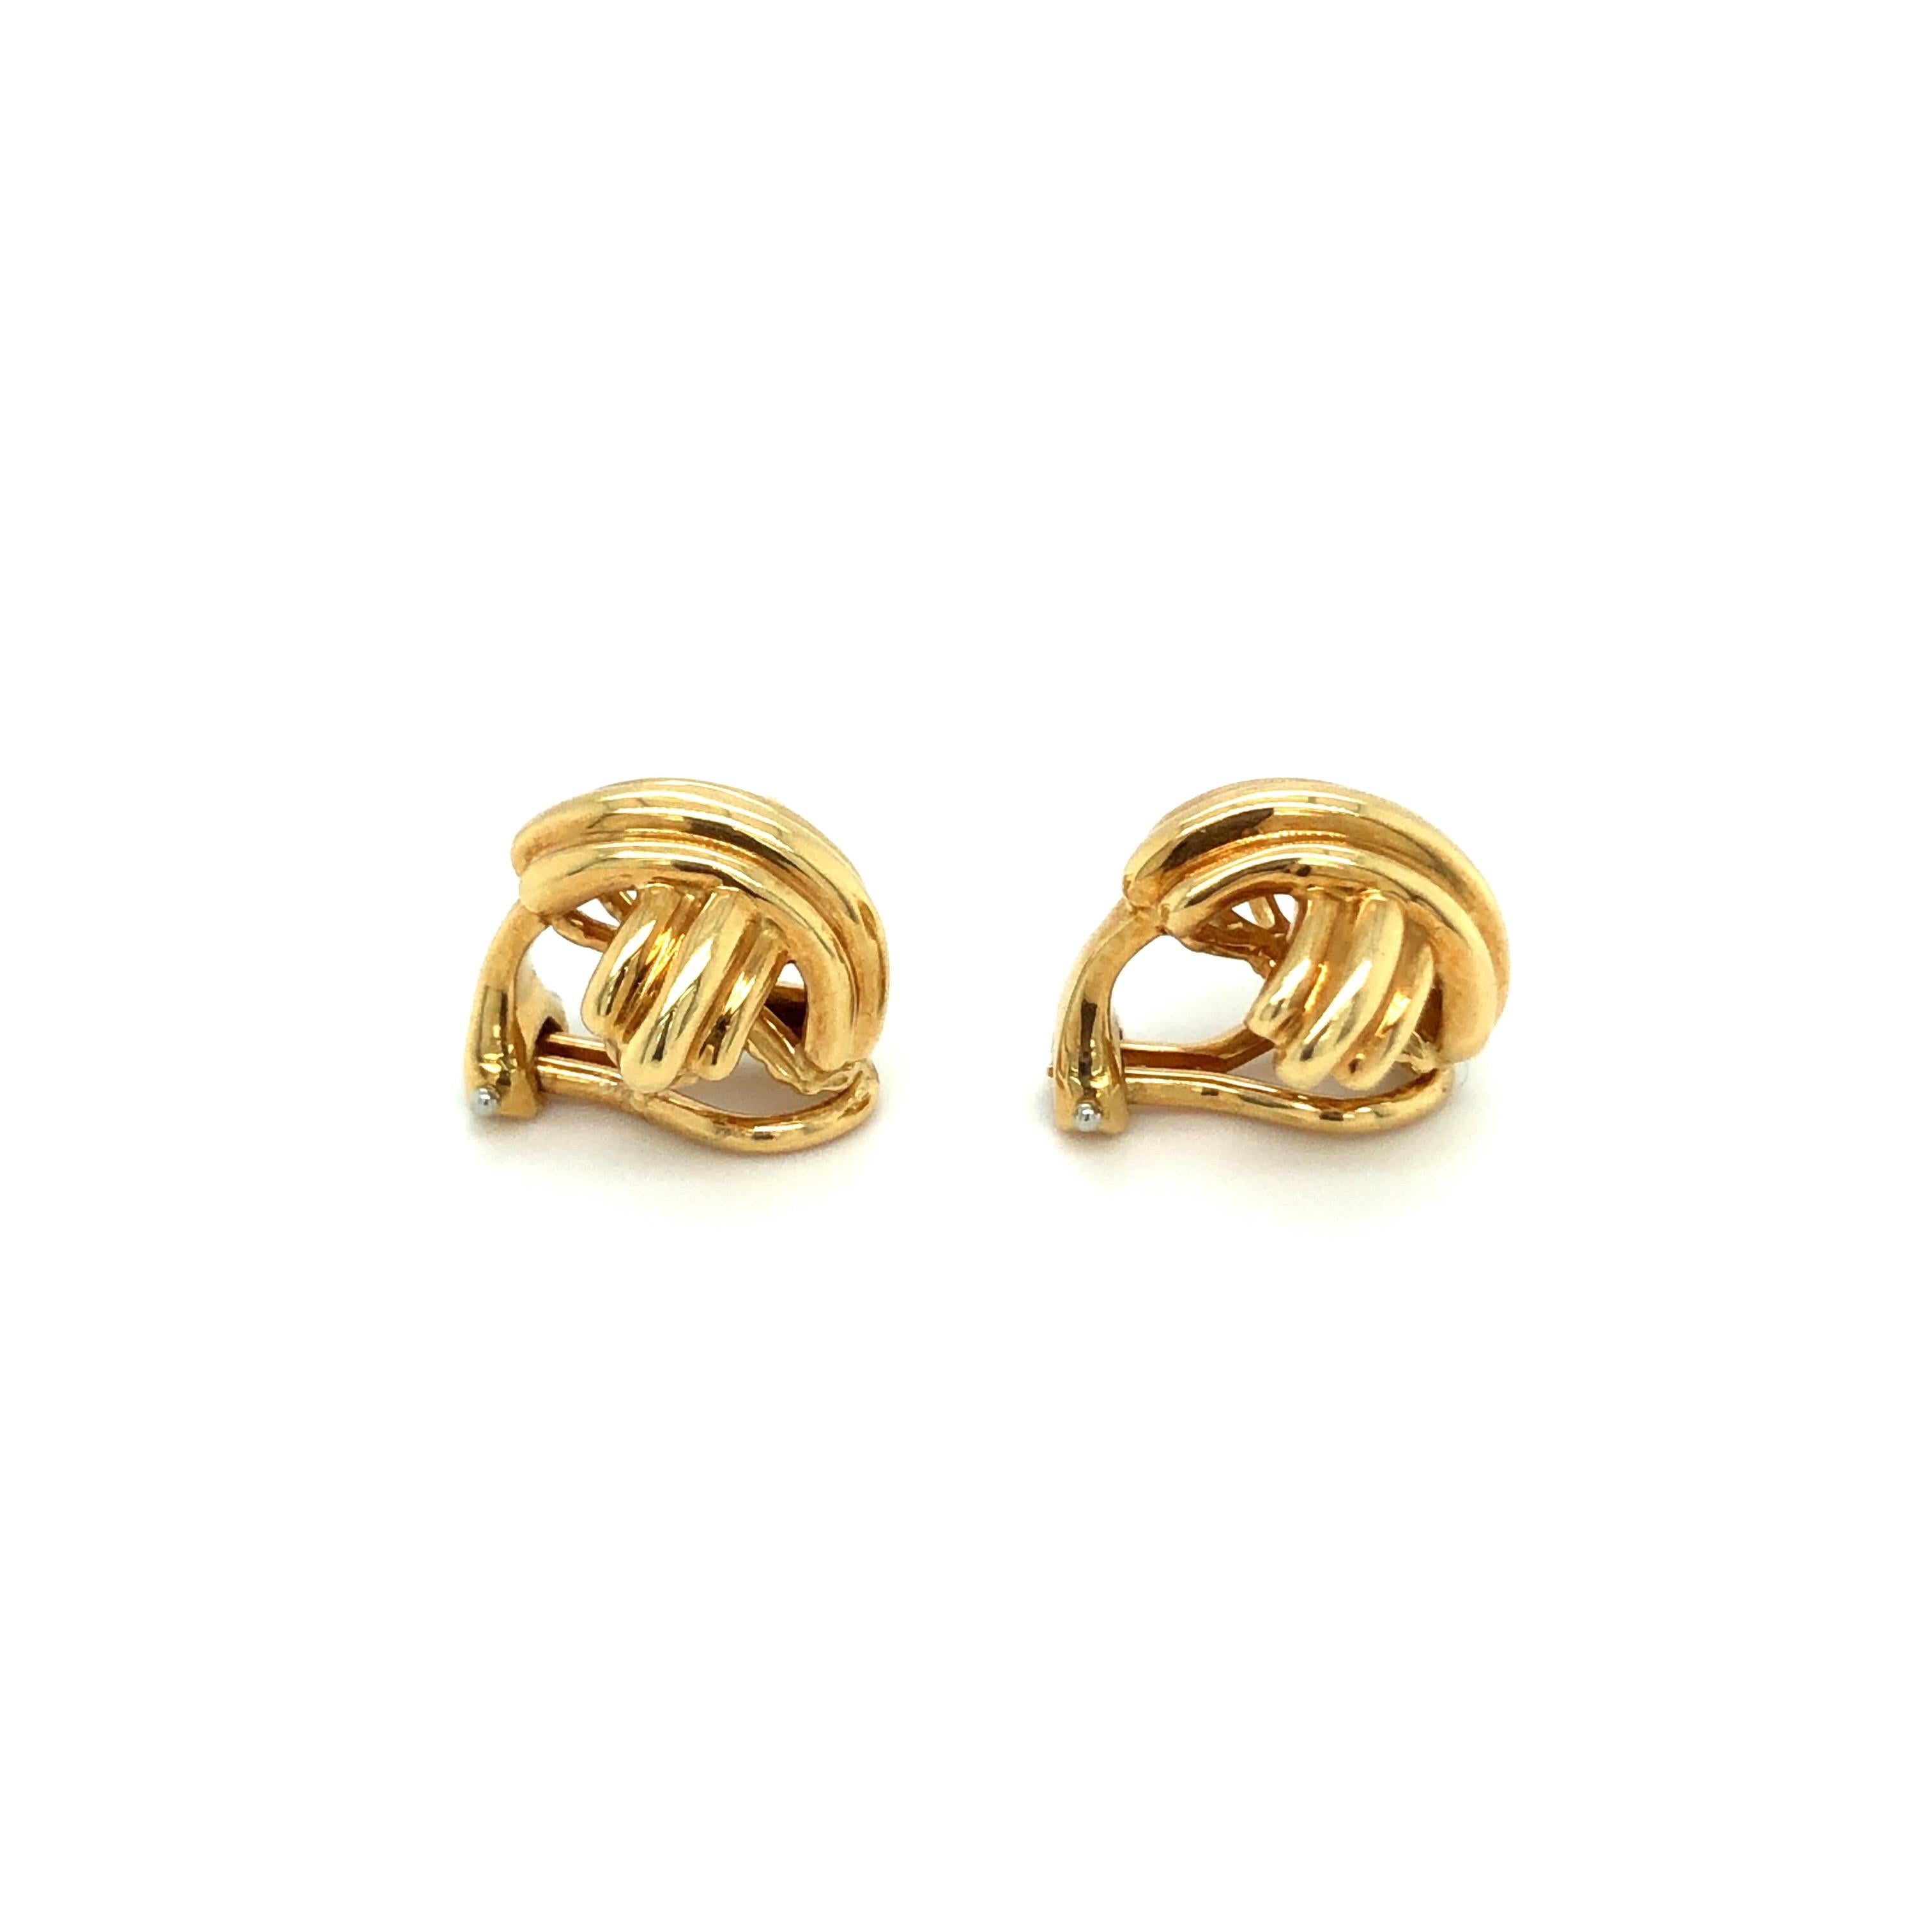 Pair of 18 karat yellow gold Signature X Collection ear clips by Tiffany & Co.
These stylish ear clips feature the iconic crossed band motif which is characteristical for the jewels from the Signature X collection. They are completed by hinged omega